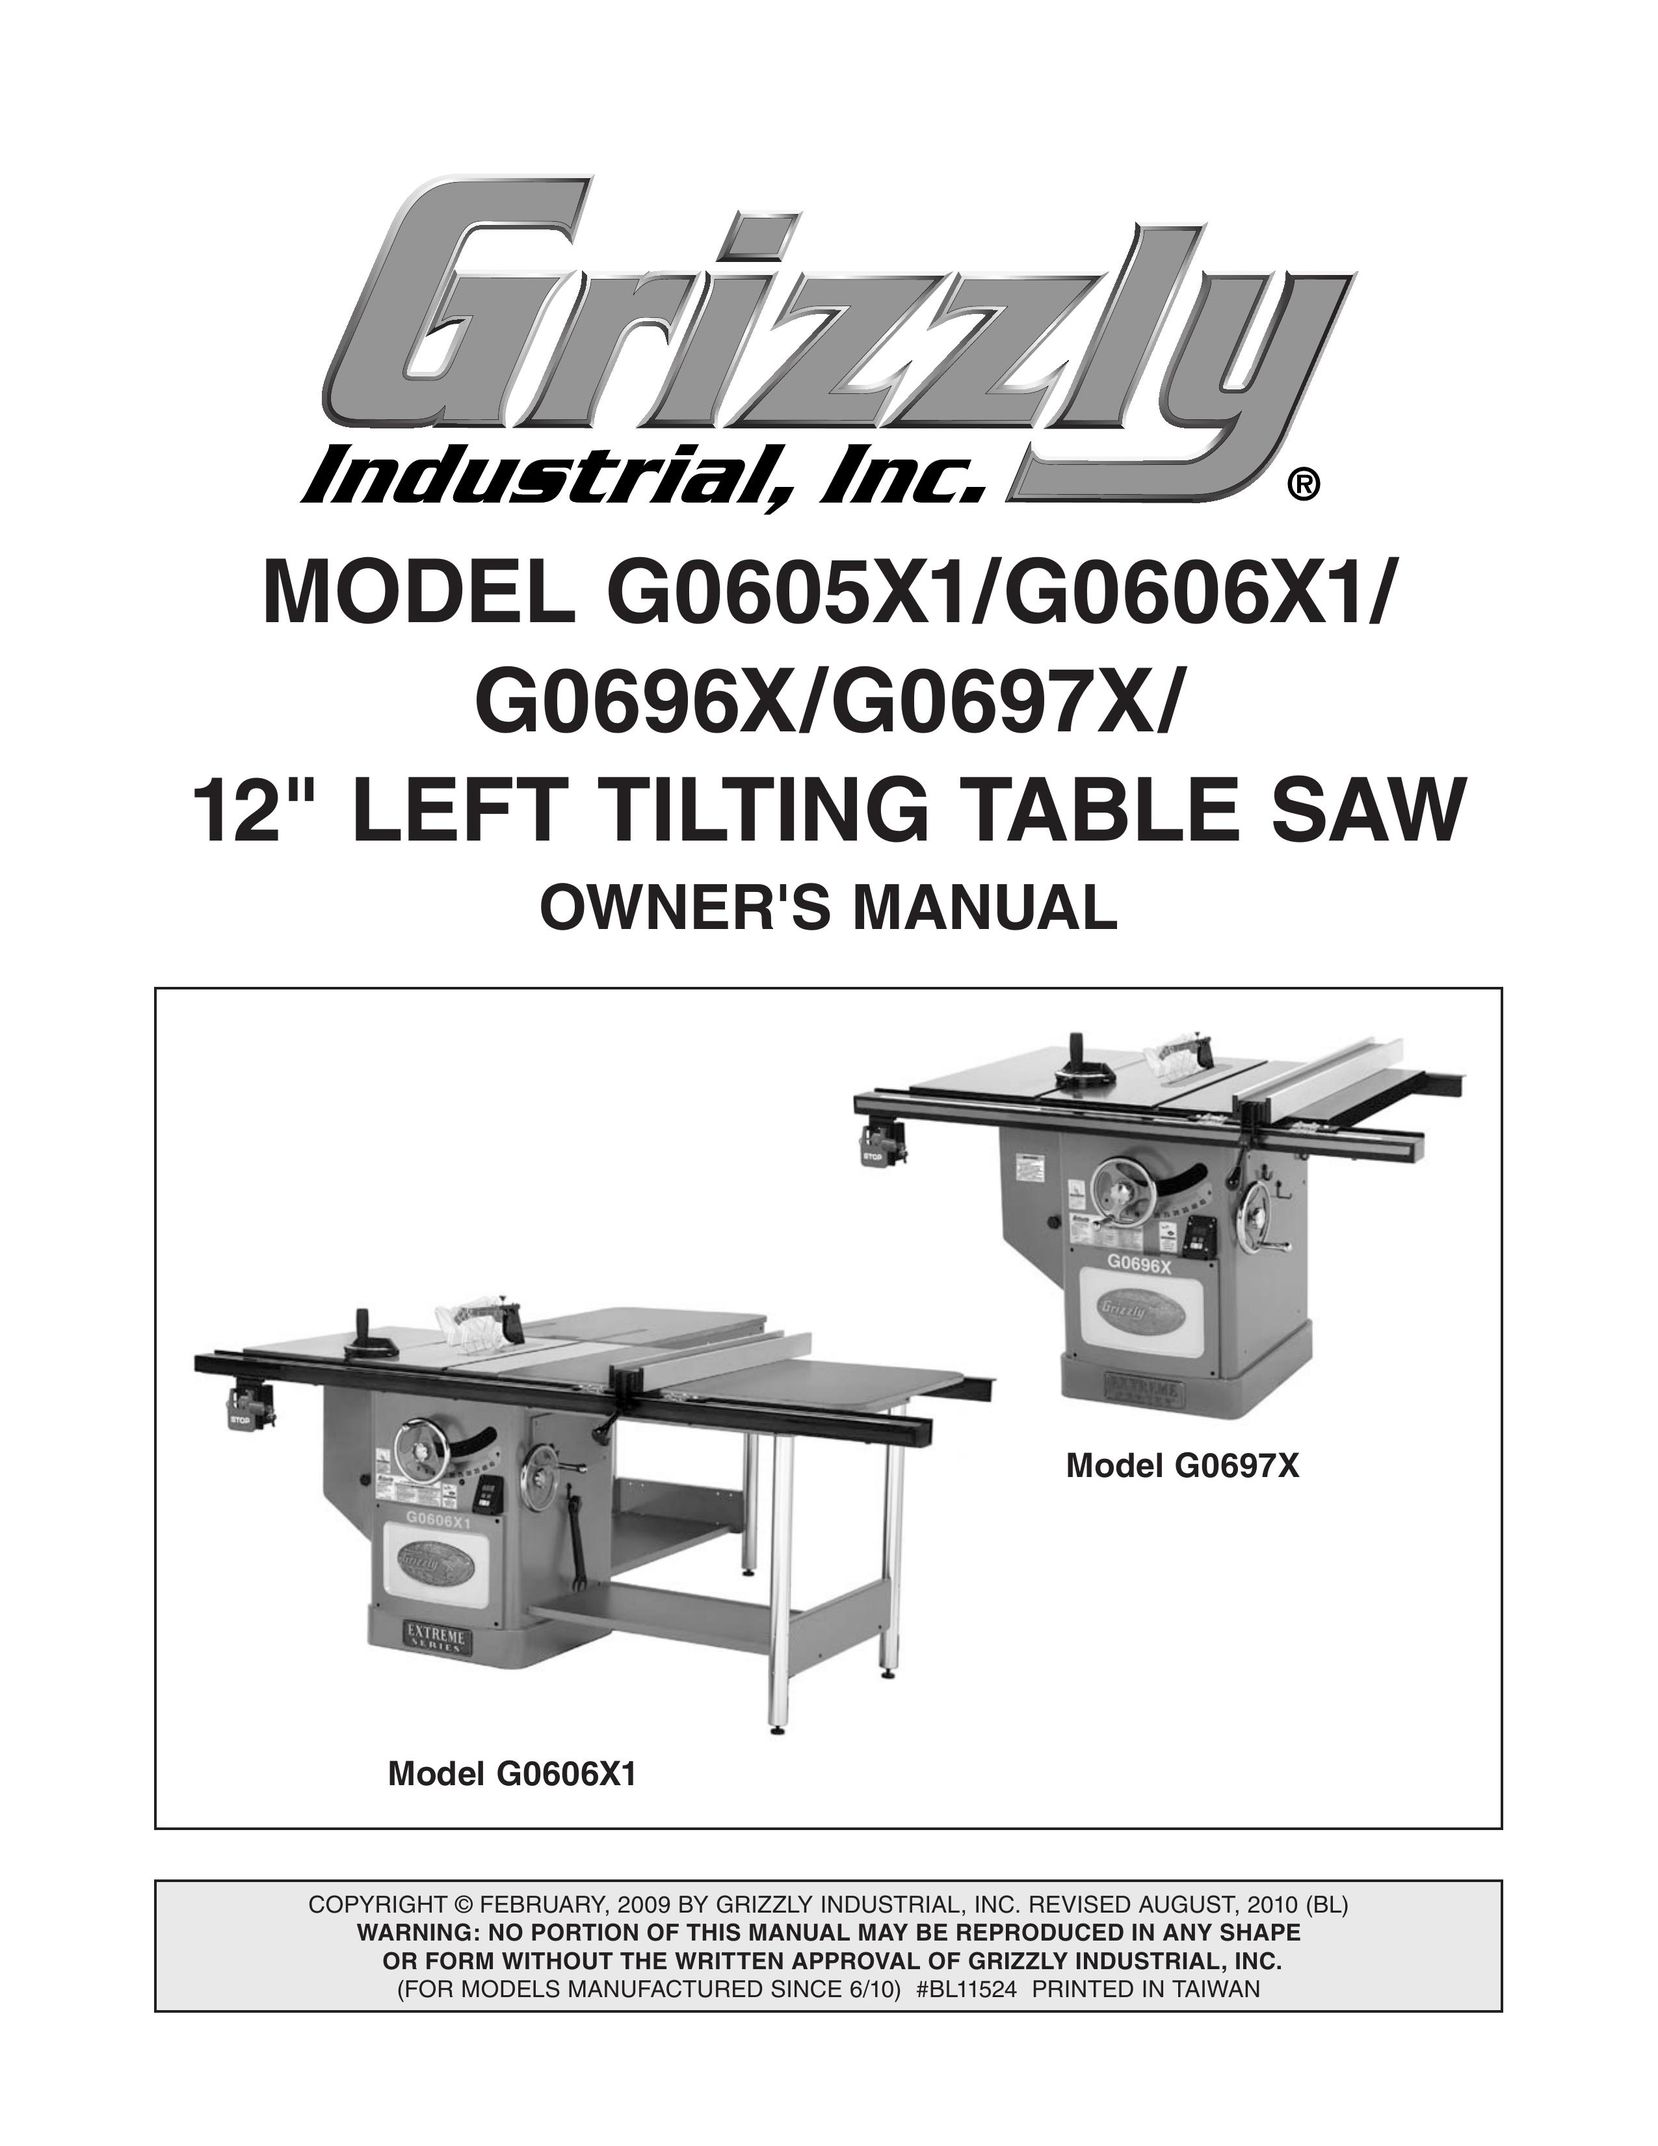 Grizzly G0606X1 Paint Sprayer User Manual